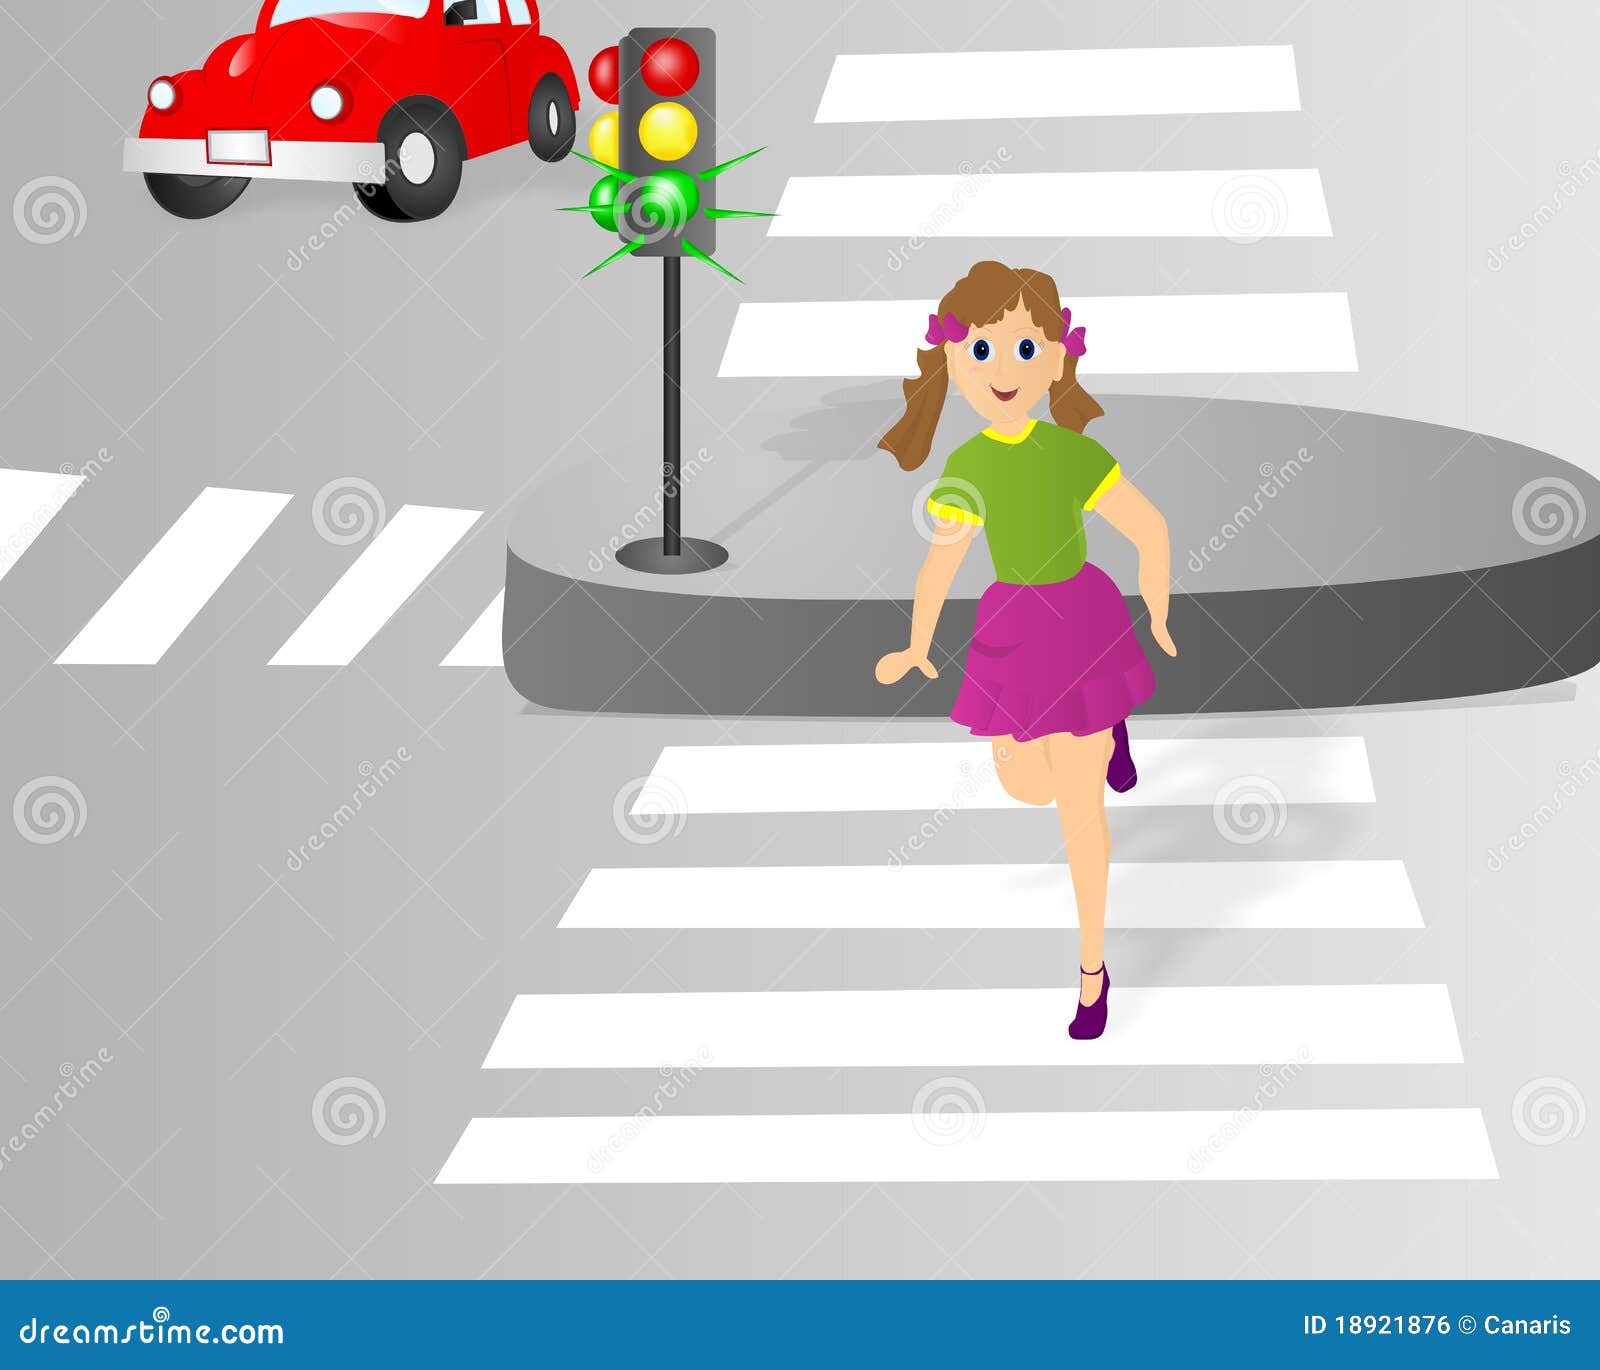 crossing the street, cdr 